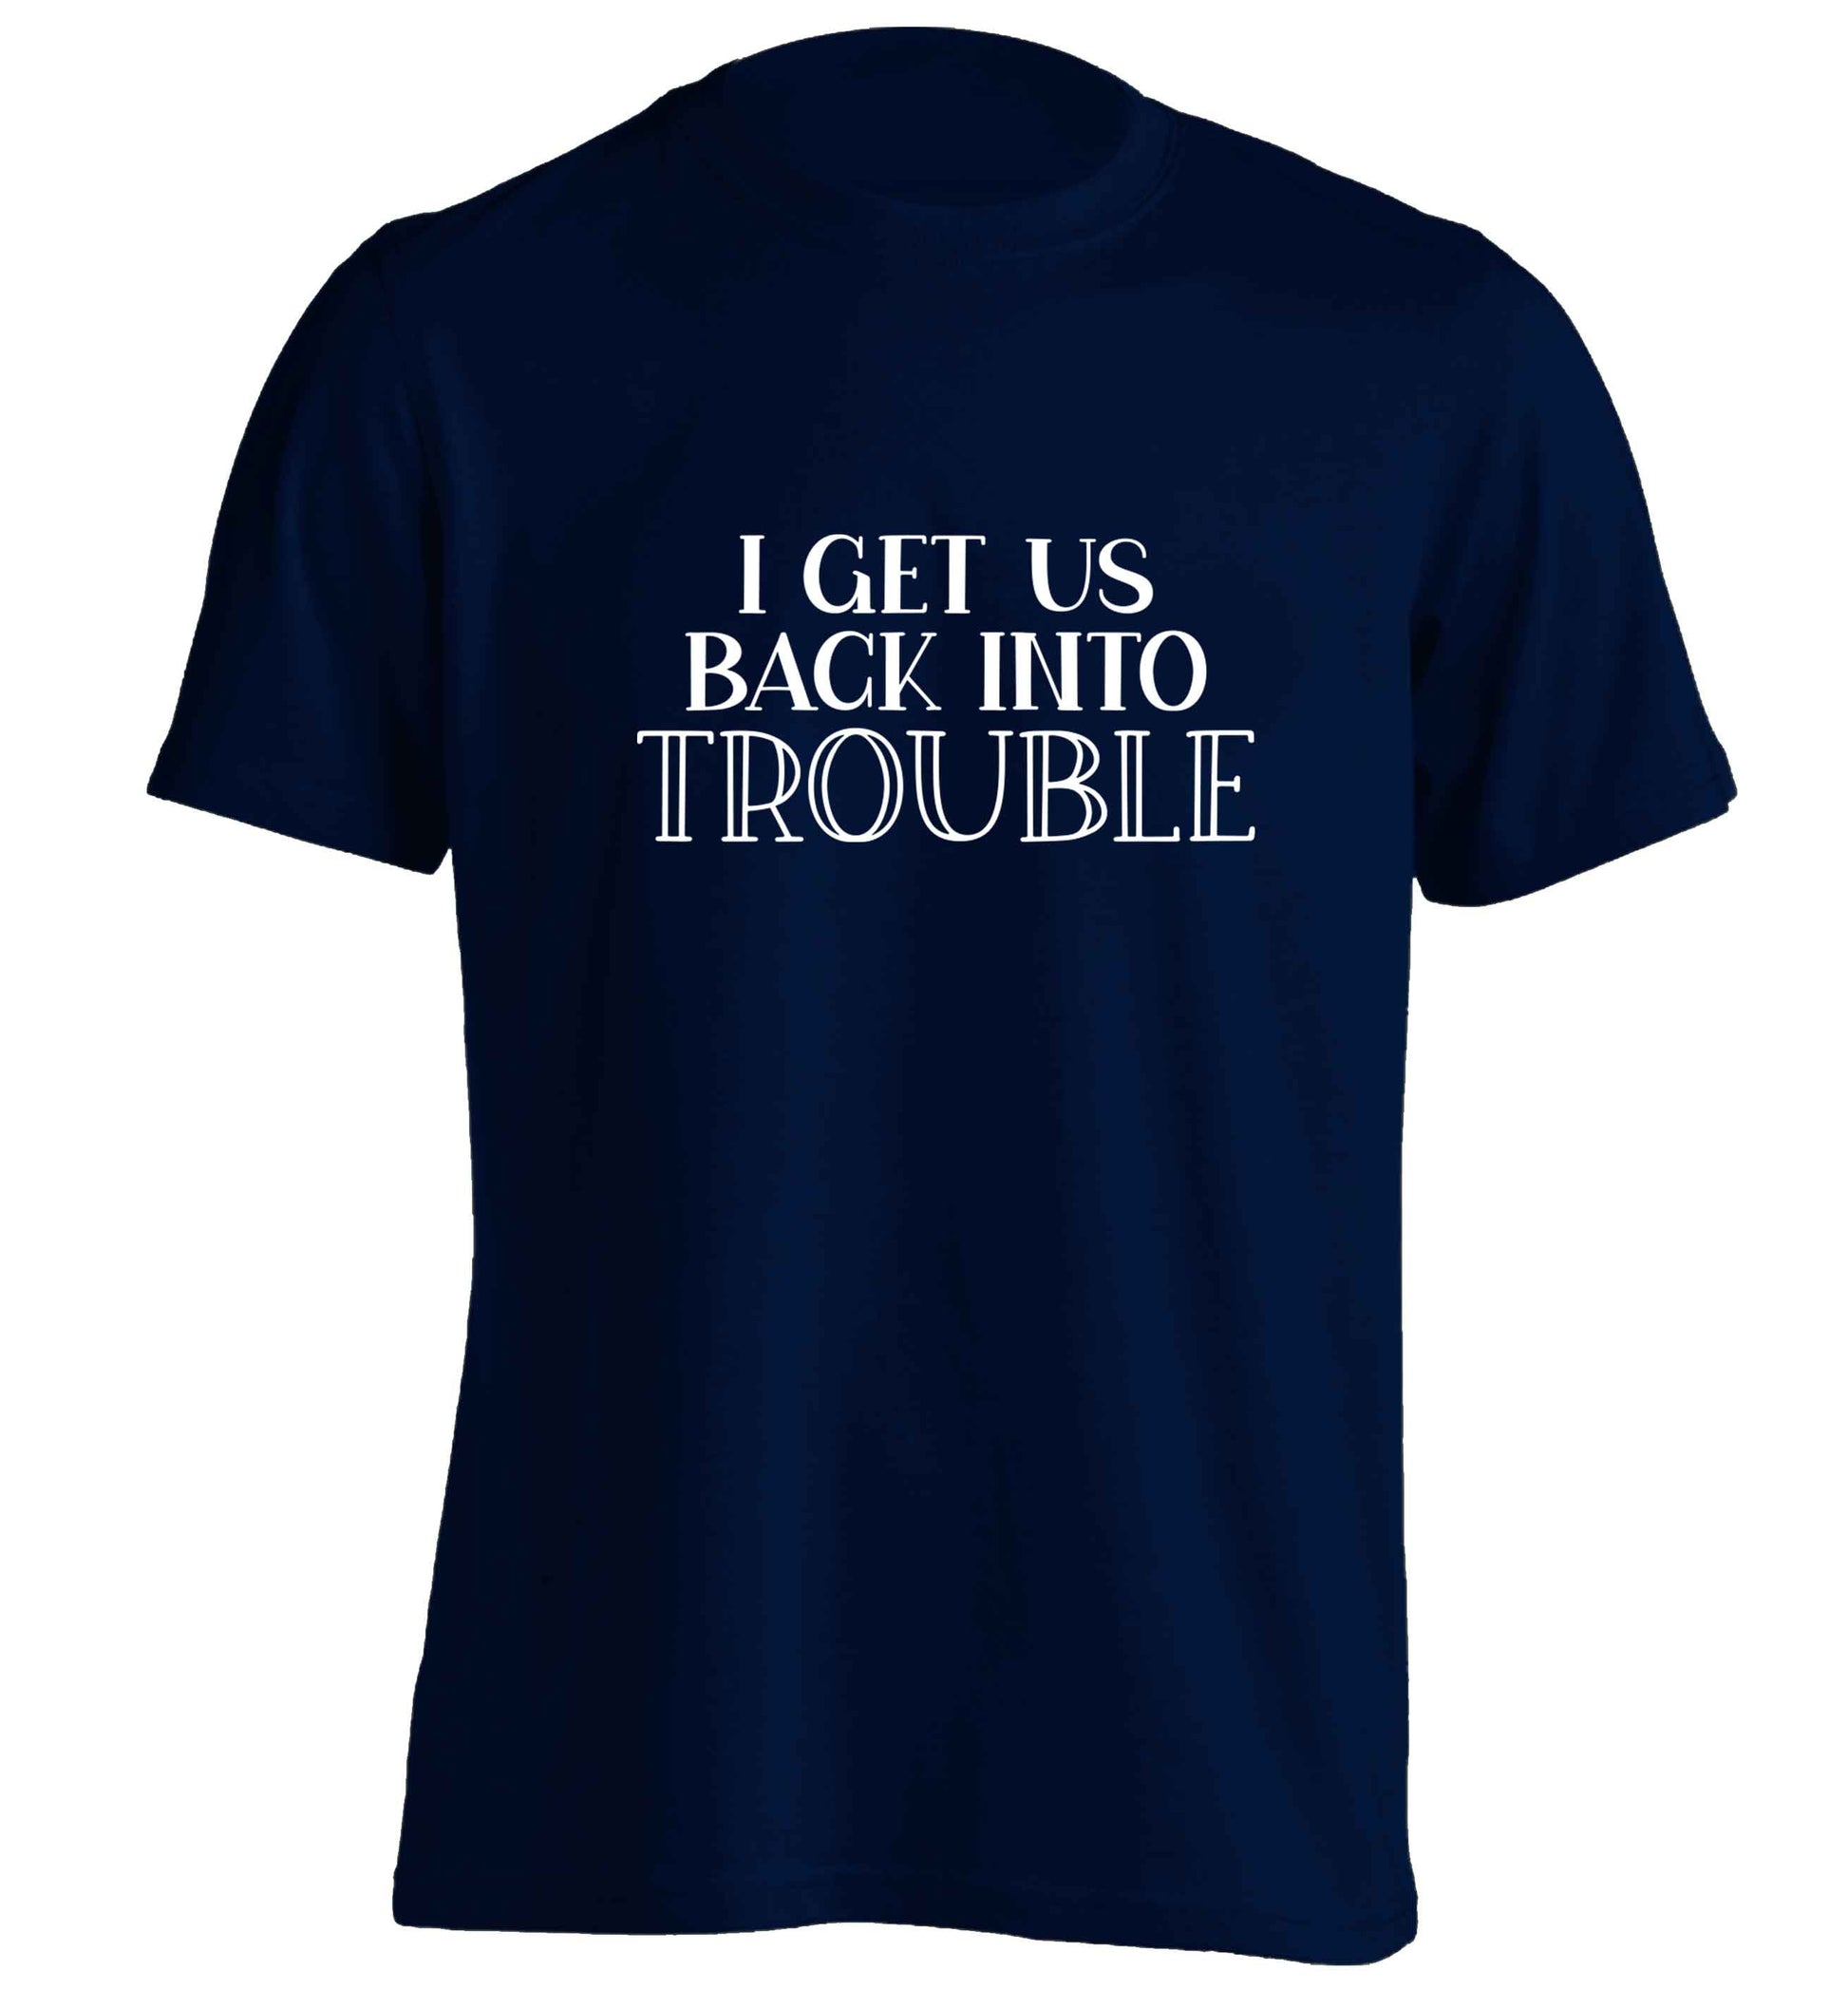 I get us back into trouble adults unisex navy Tshirt 2XL